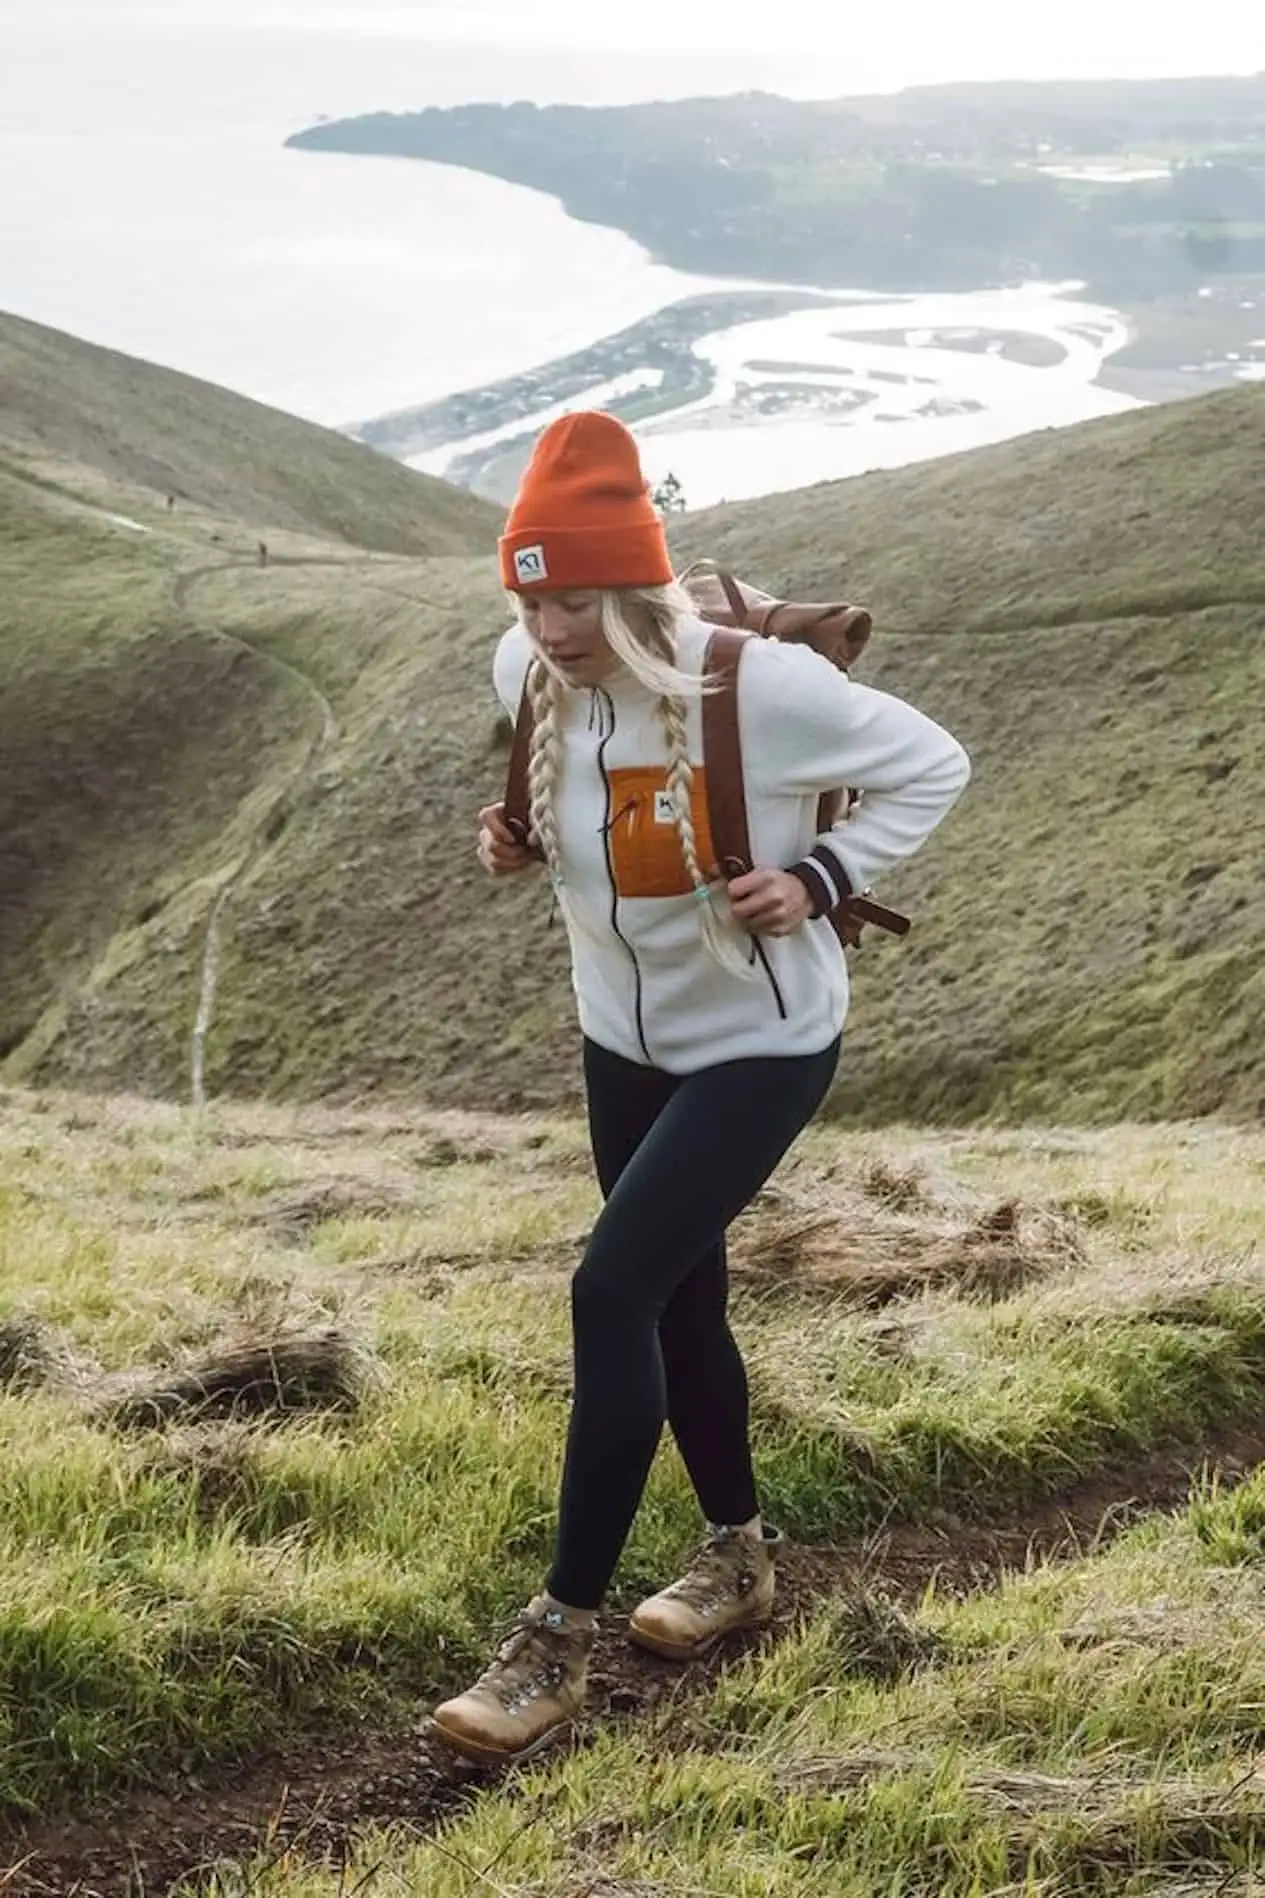 What to Wear On Hiking Date: Tips for Outdoor Adventurers